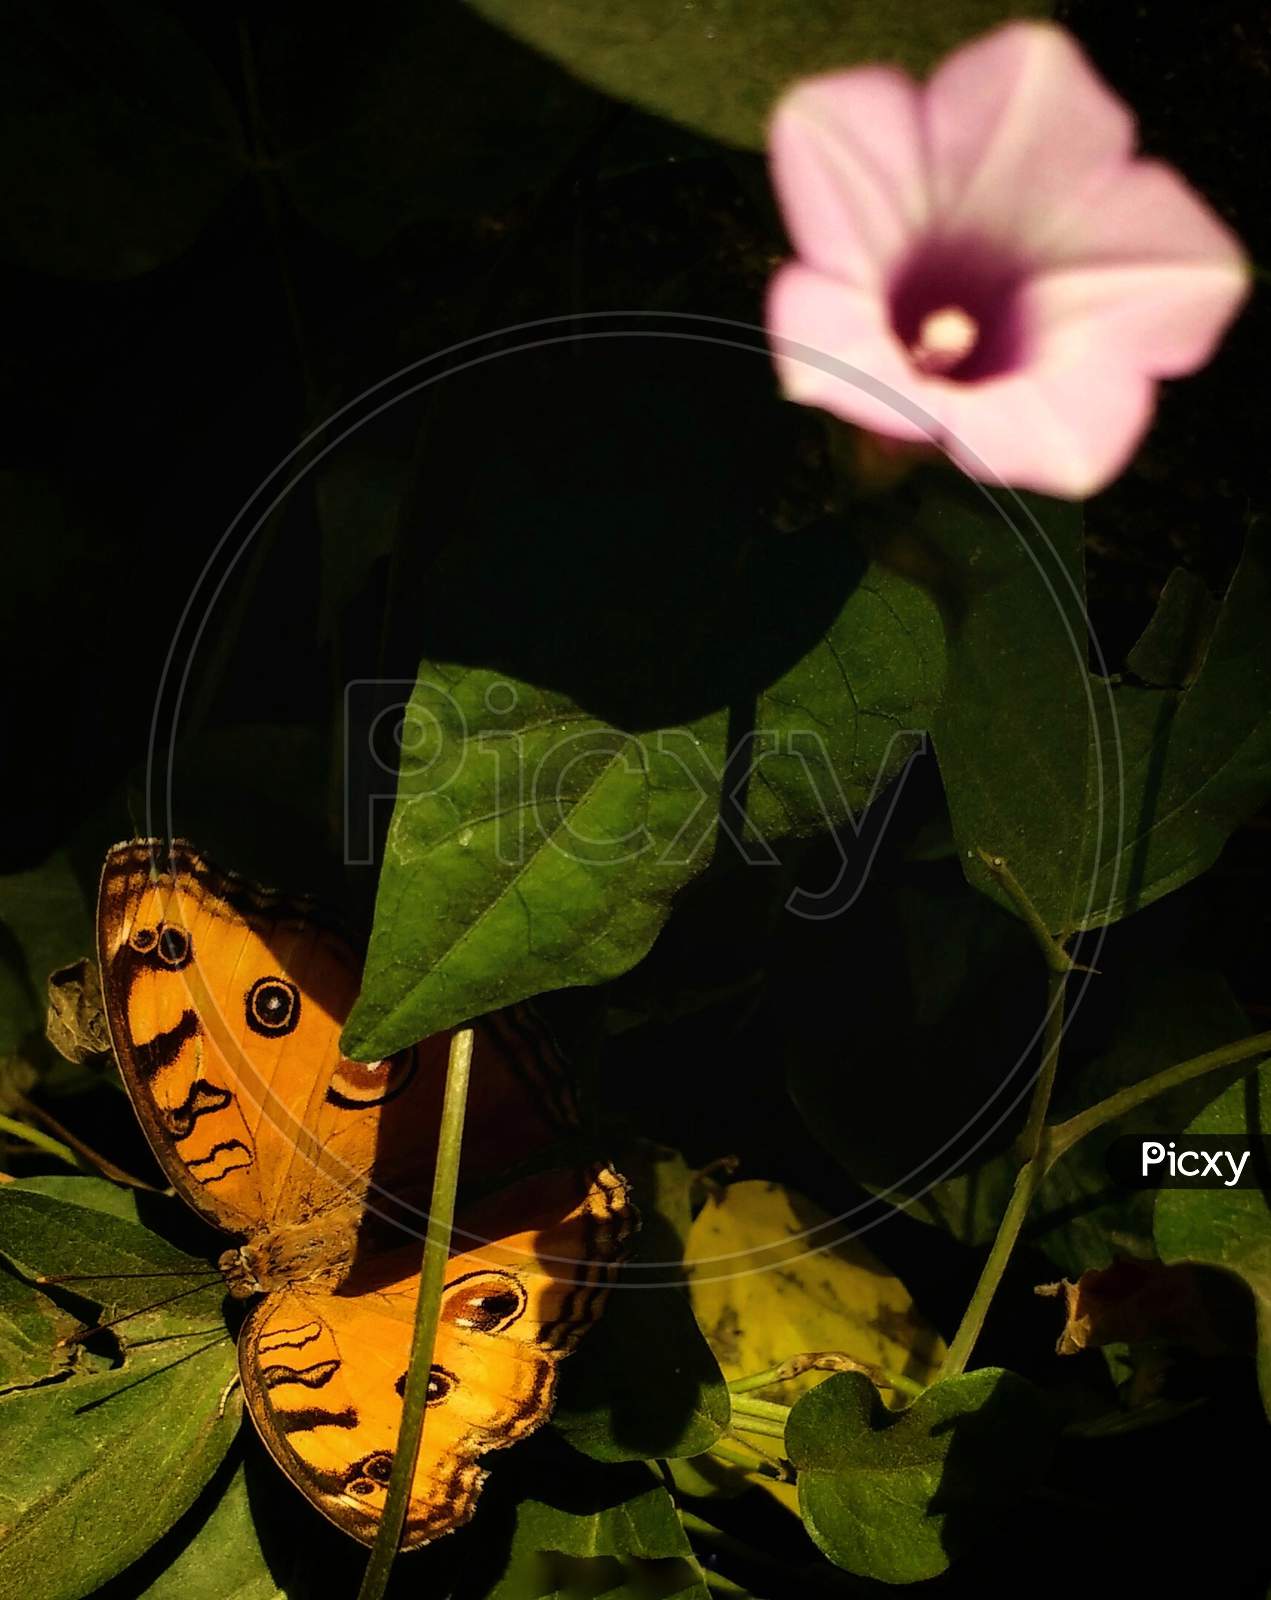 The innocent flower and butterfly